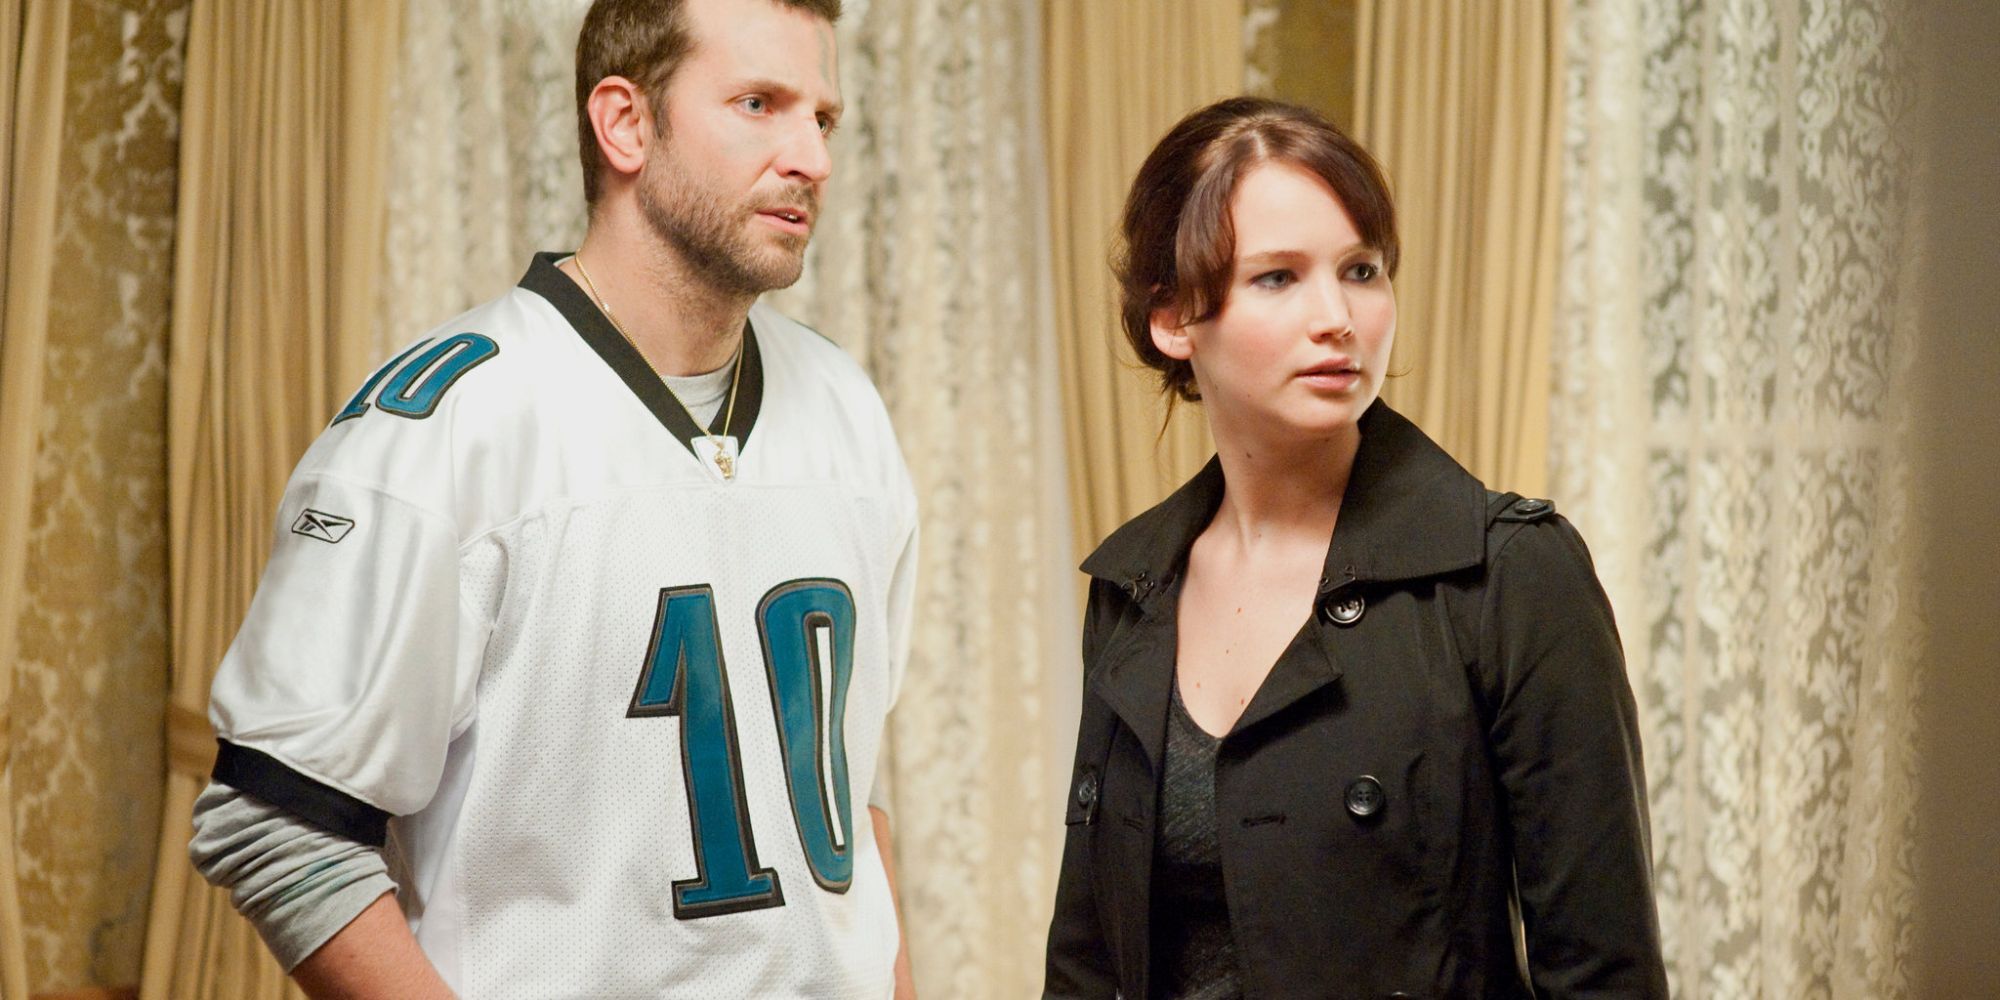 Jennifer Lawrence and Bradley Cooper wearing a NFL jersey in Silver Linings Playbook